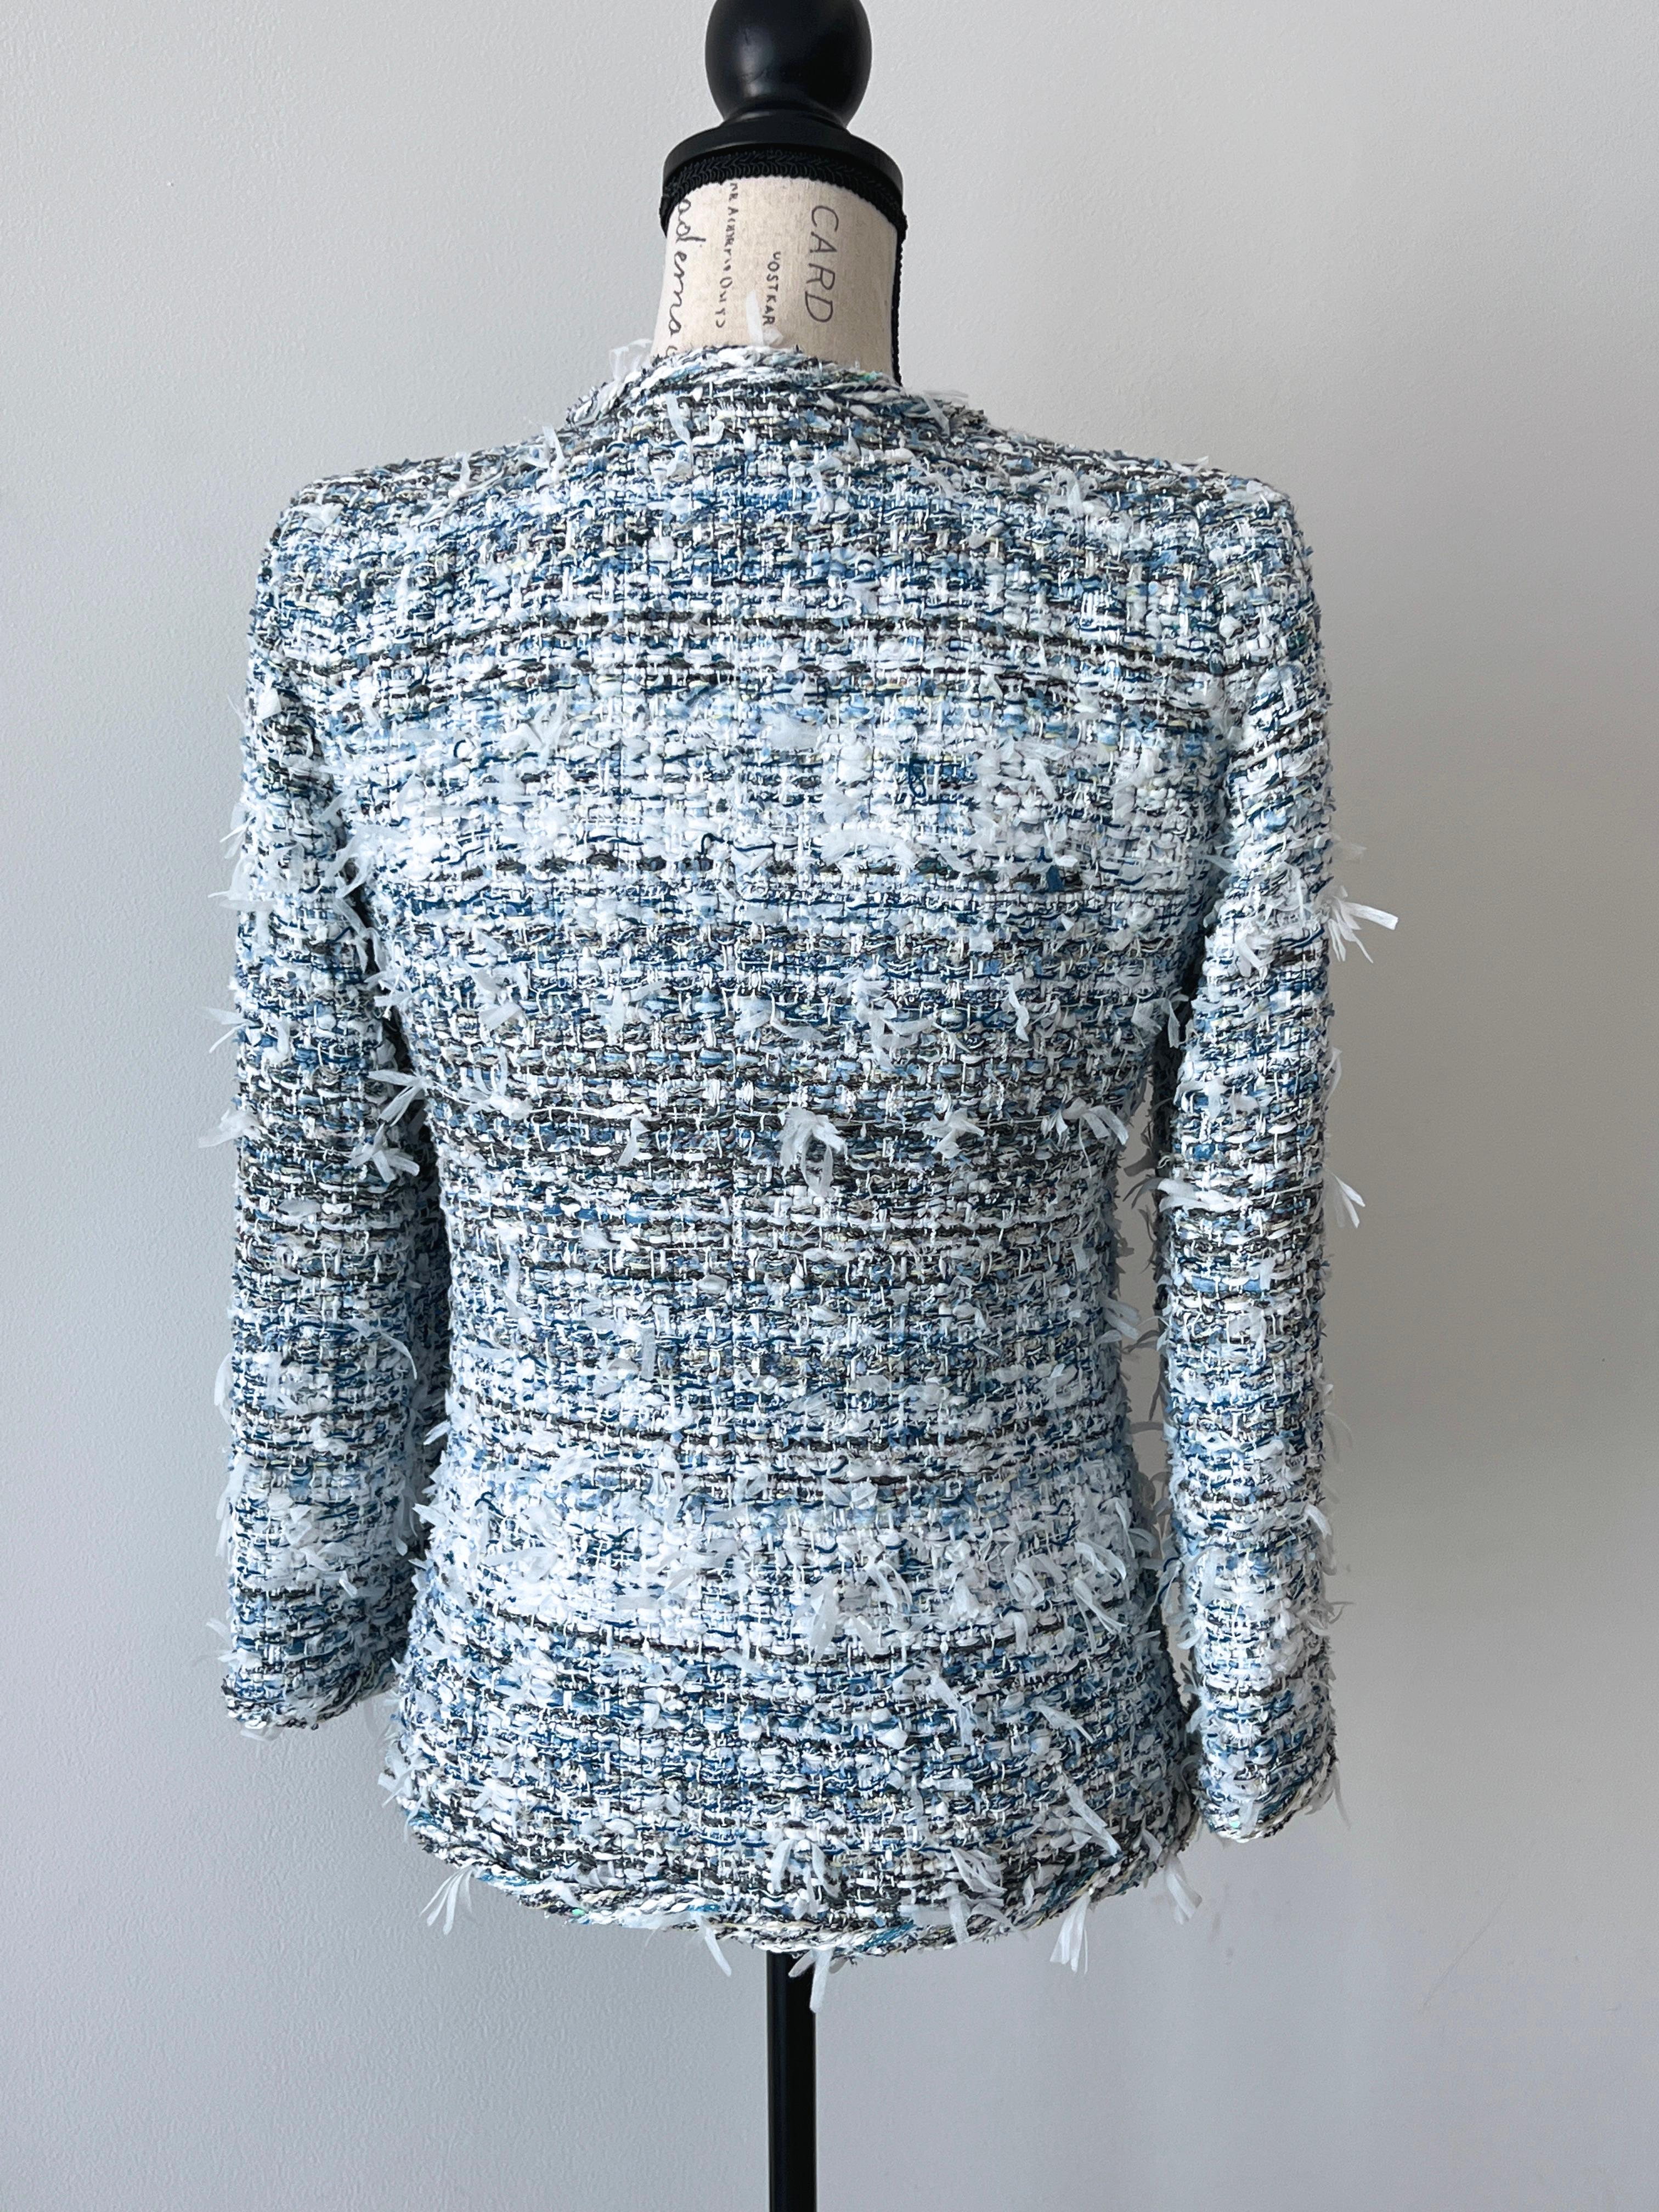 Chanel Ribbon Tweed Waterfall Collection Jacket 10